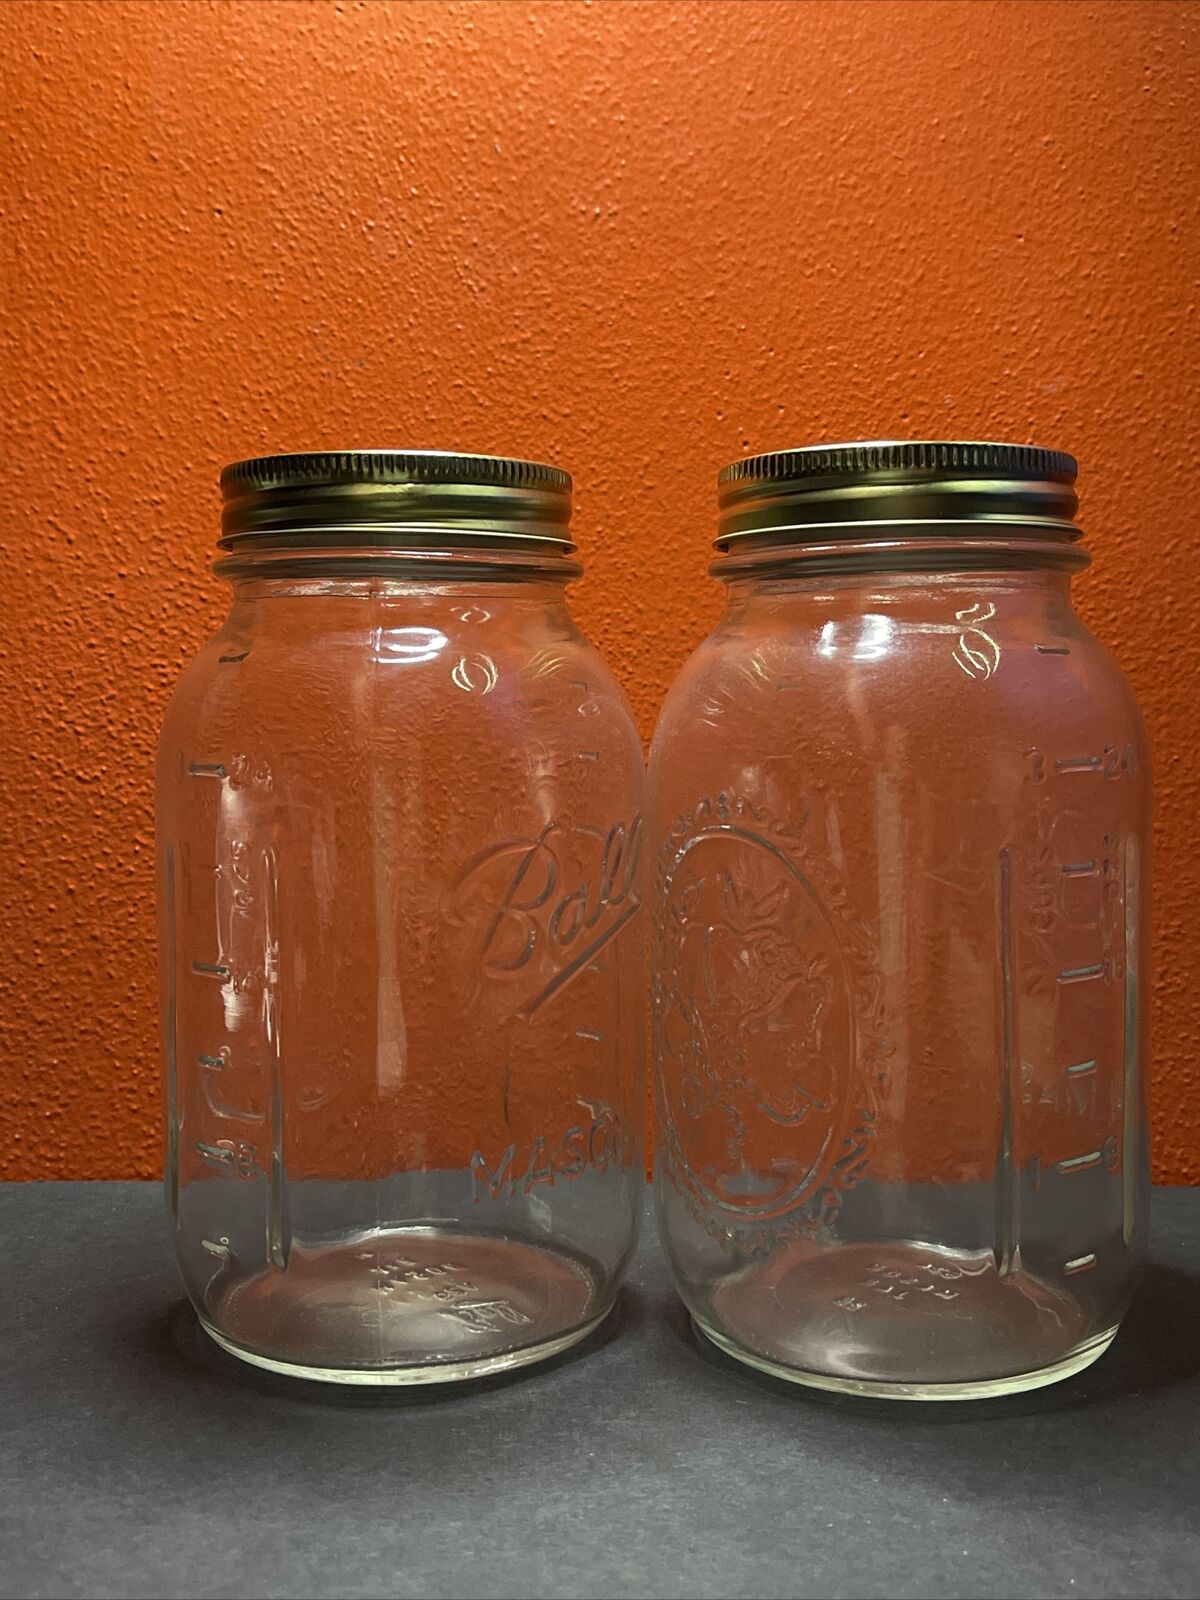 2 Vintage Clear Glass Quart Ball Mason Canning Jars From Case W/Lid 62A